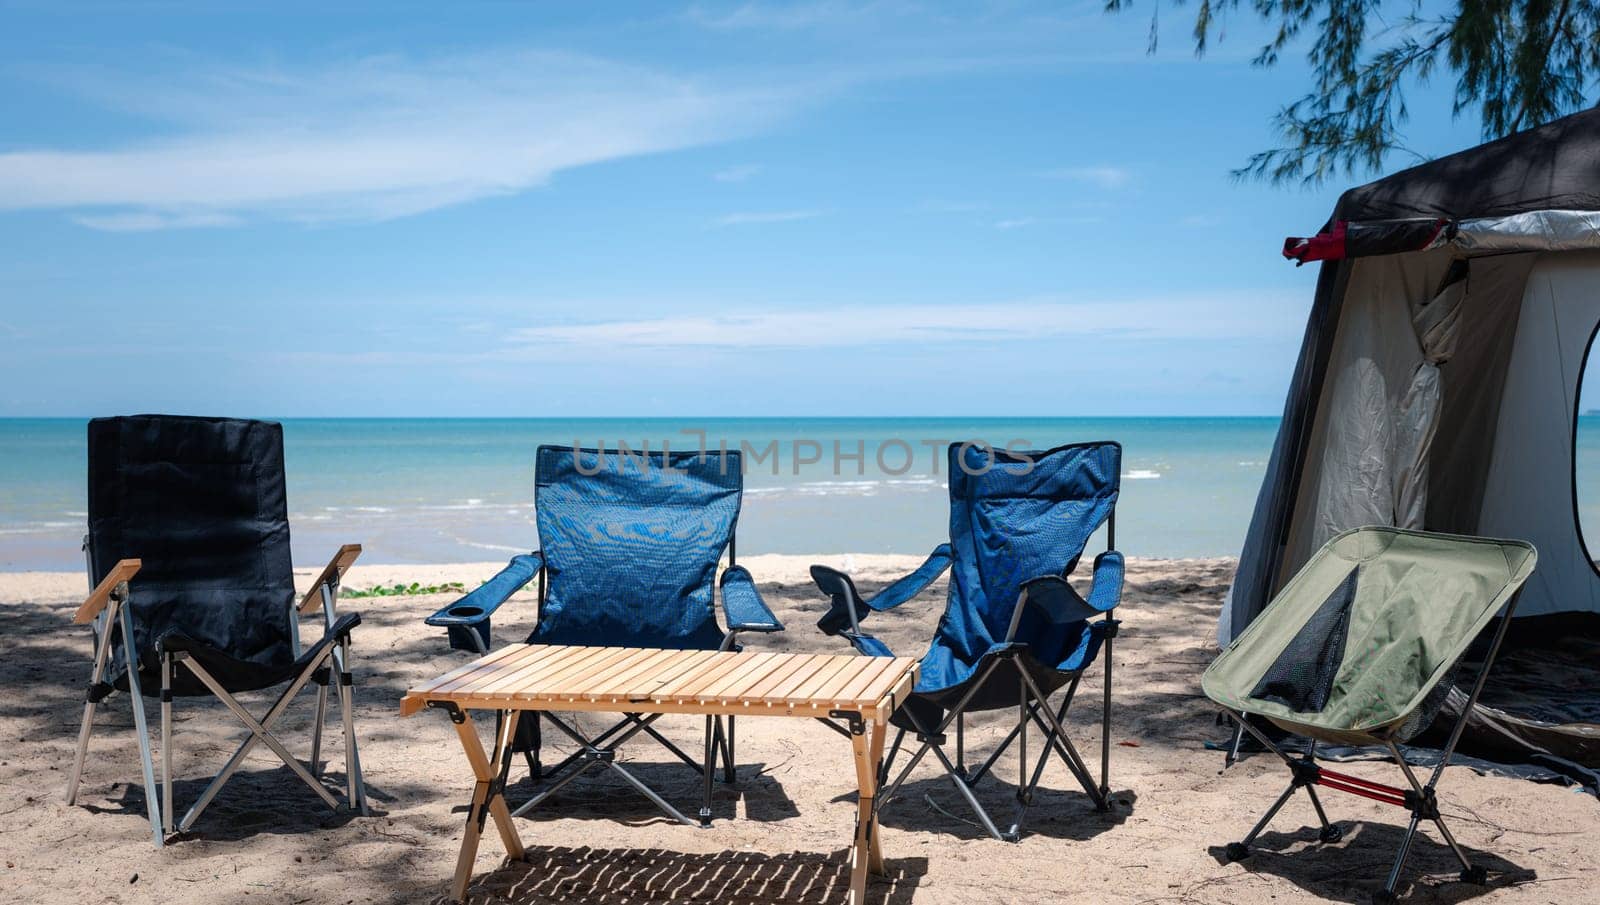 Beachfront campsite, Empty chairs, picnic table, and a tent under the summer sun. Find happiness in outdoor adventures, family time, and the beauty of nature. The sea is where it all begins.